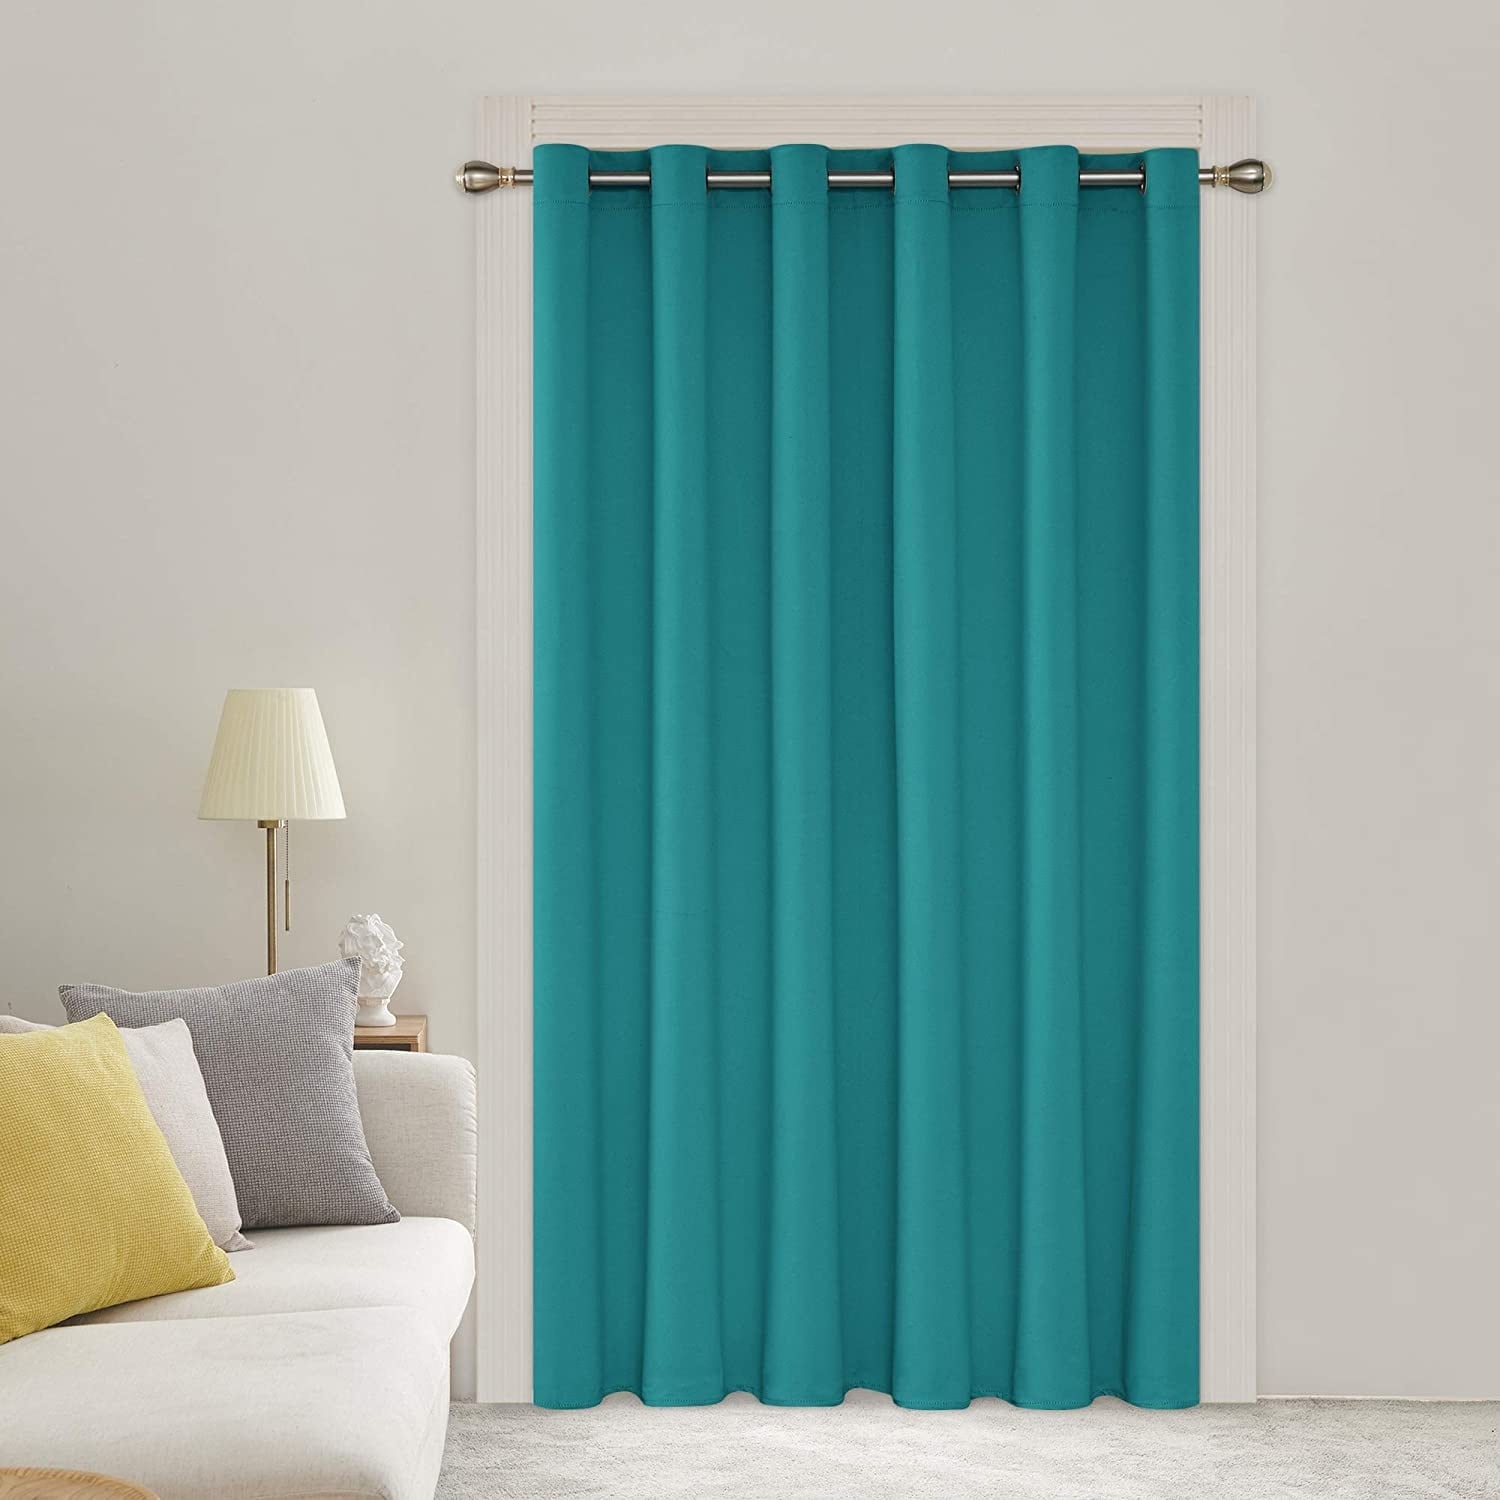 Premium Heavy Duty Room Divider Curtain with Grommet 1 Panel 